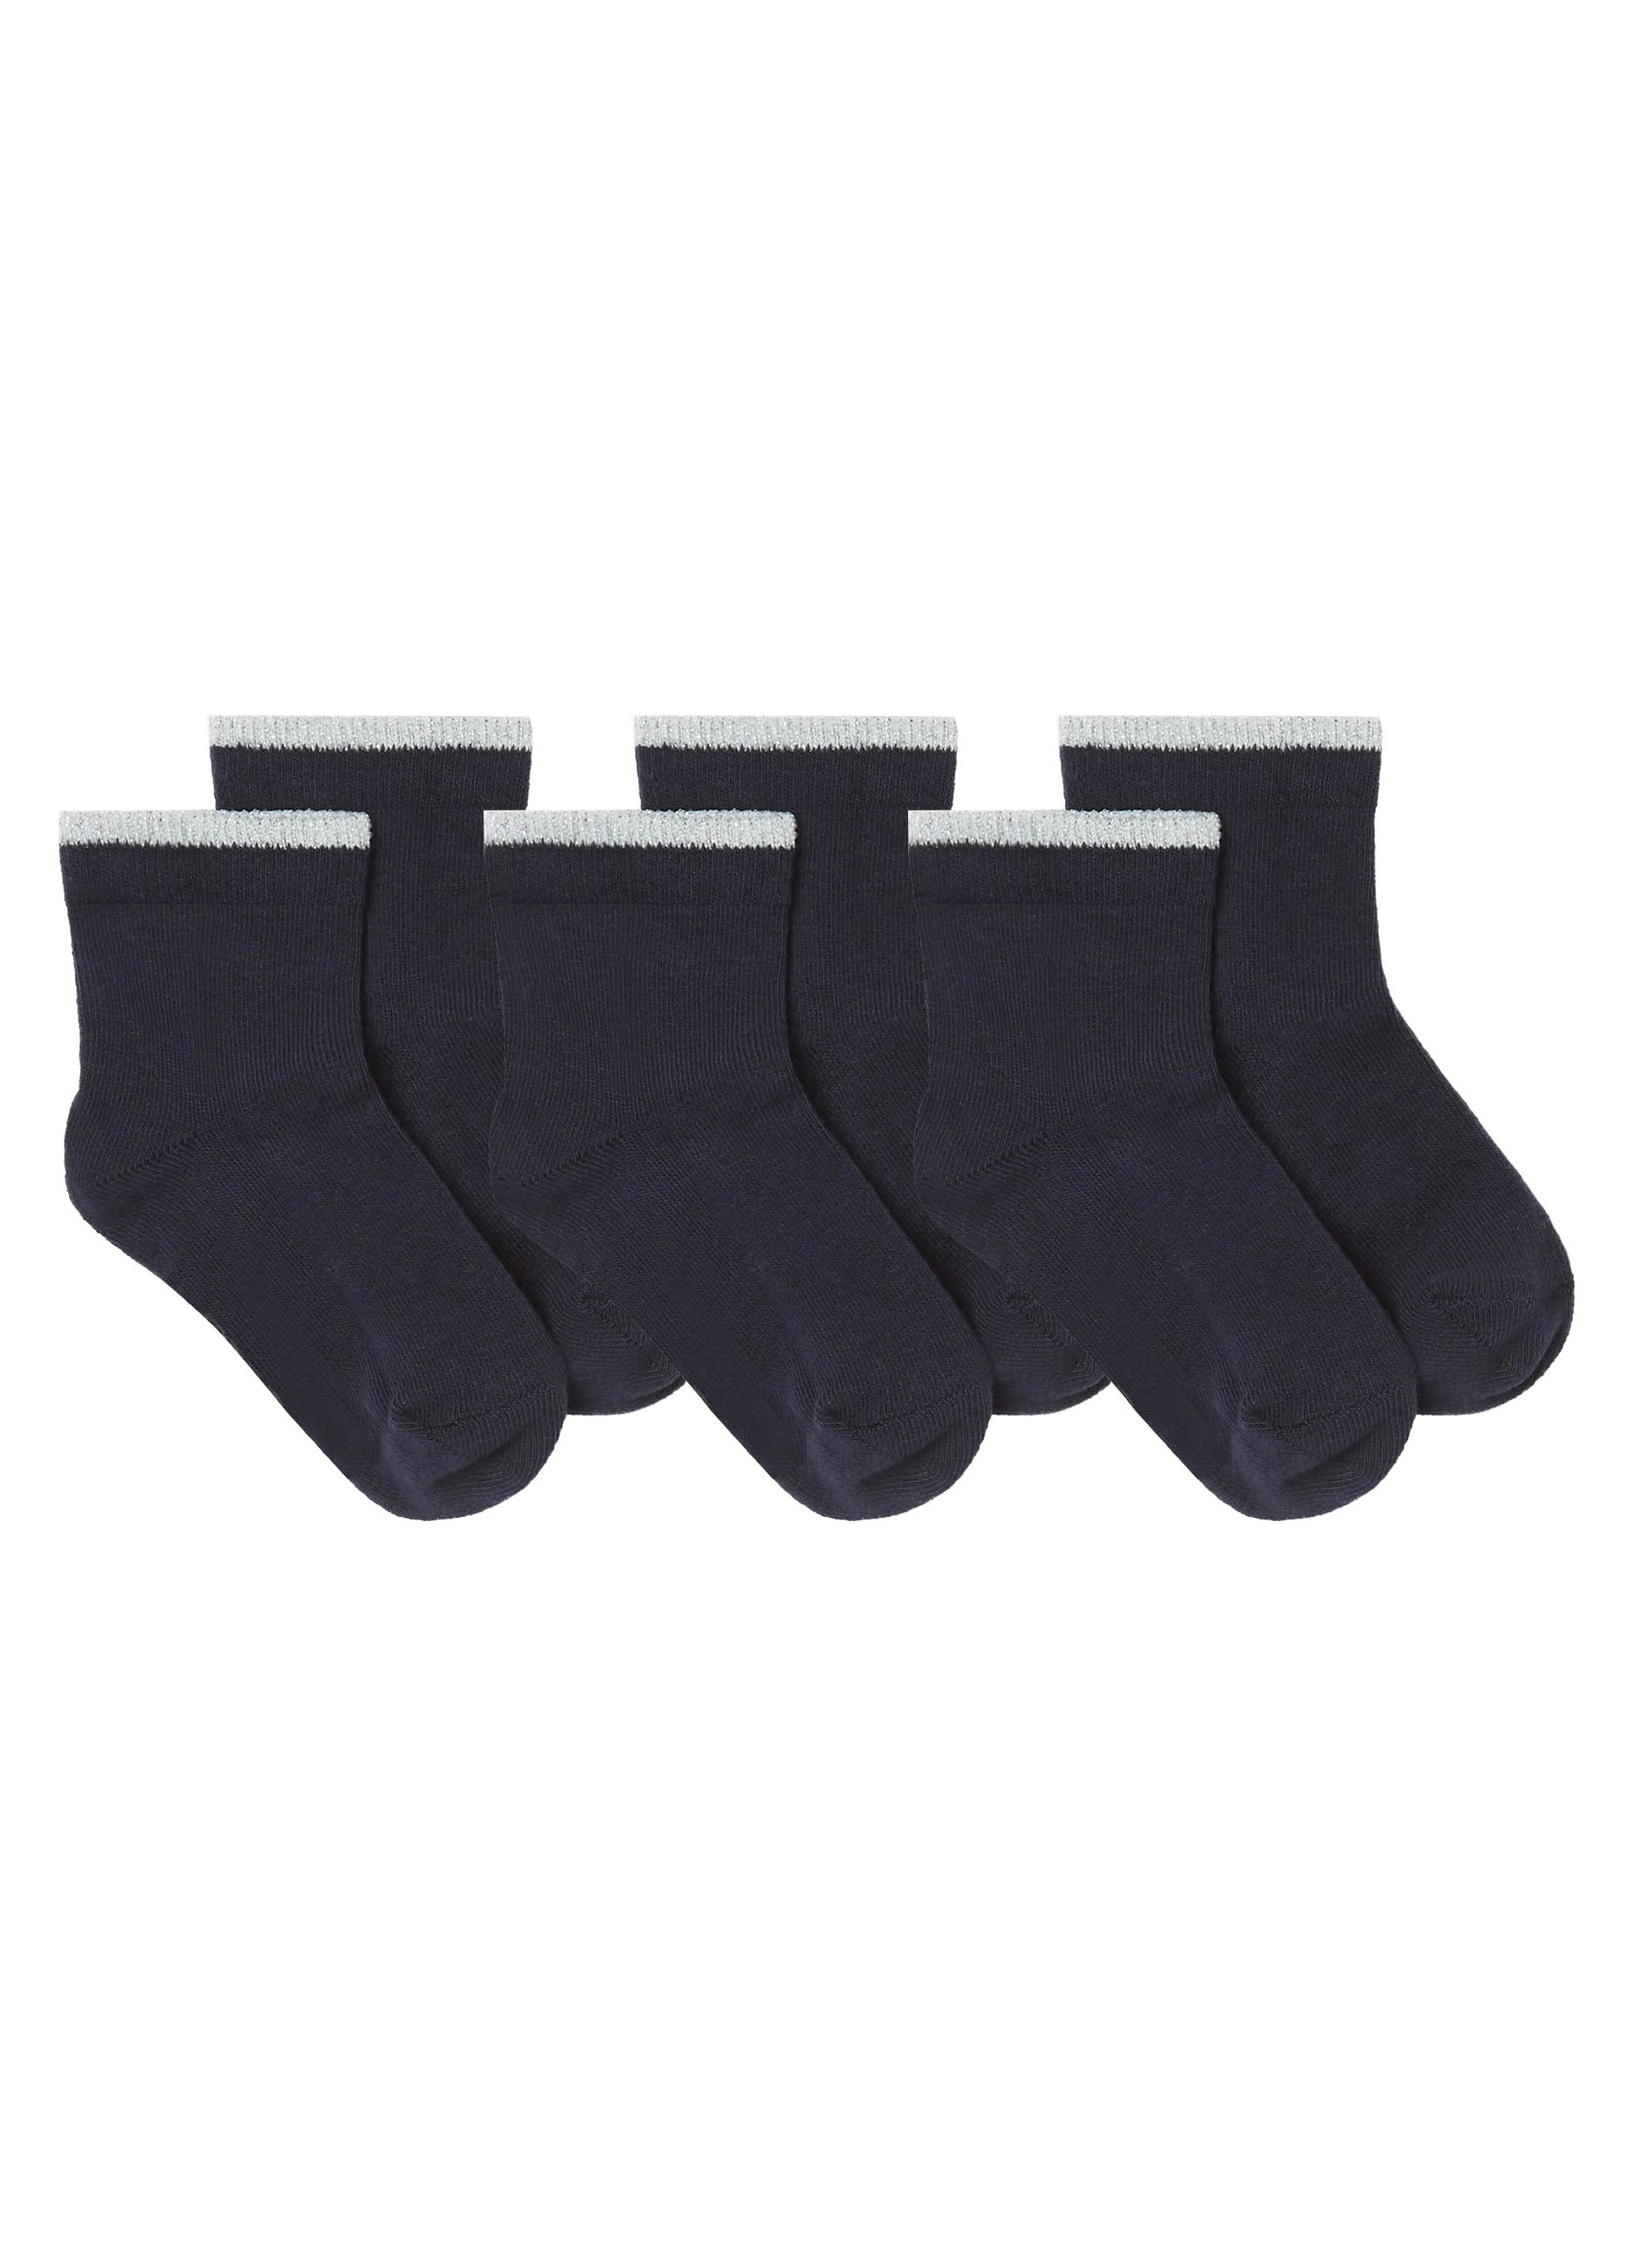 GIRL - Short stretch socks with ribbing, 3 pieces pack.